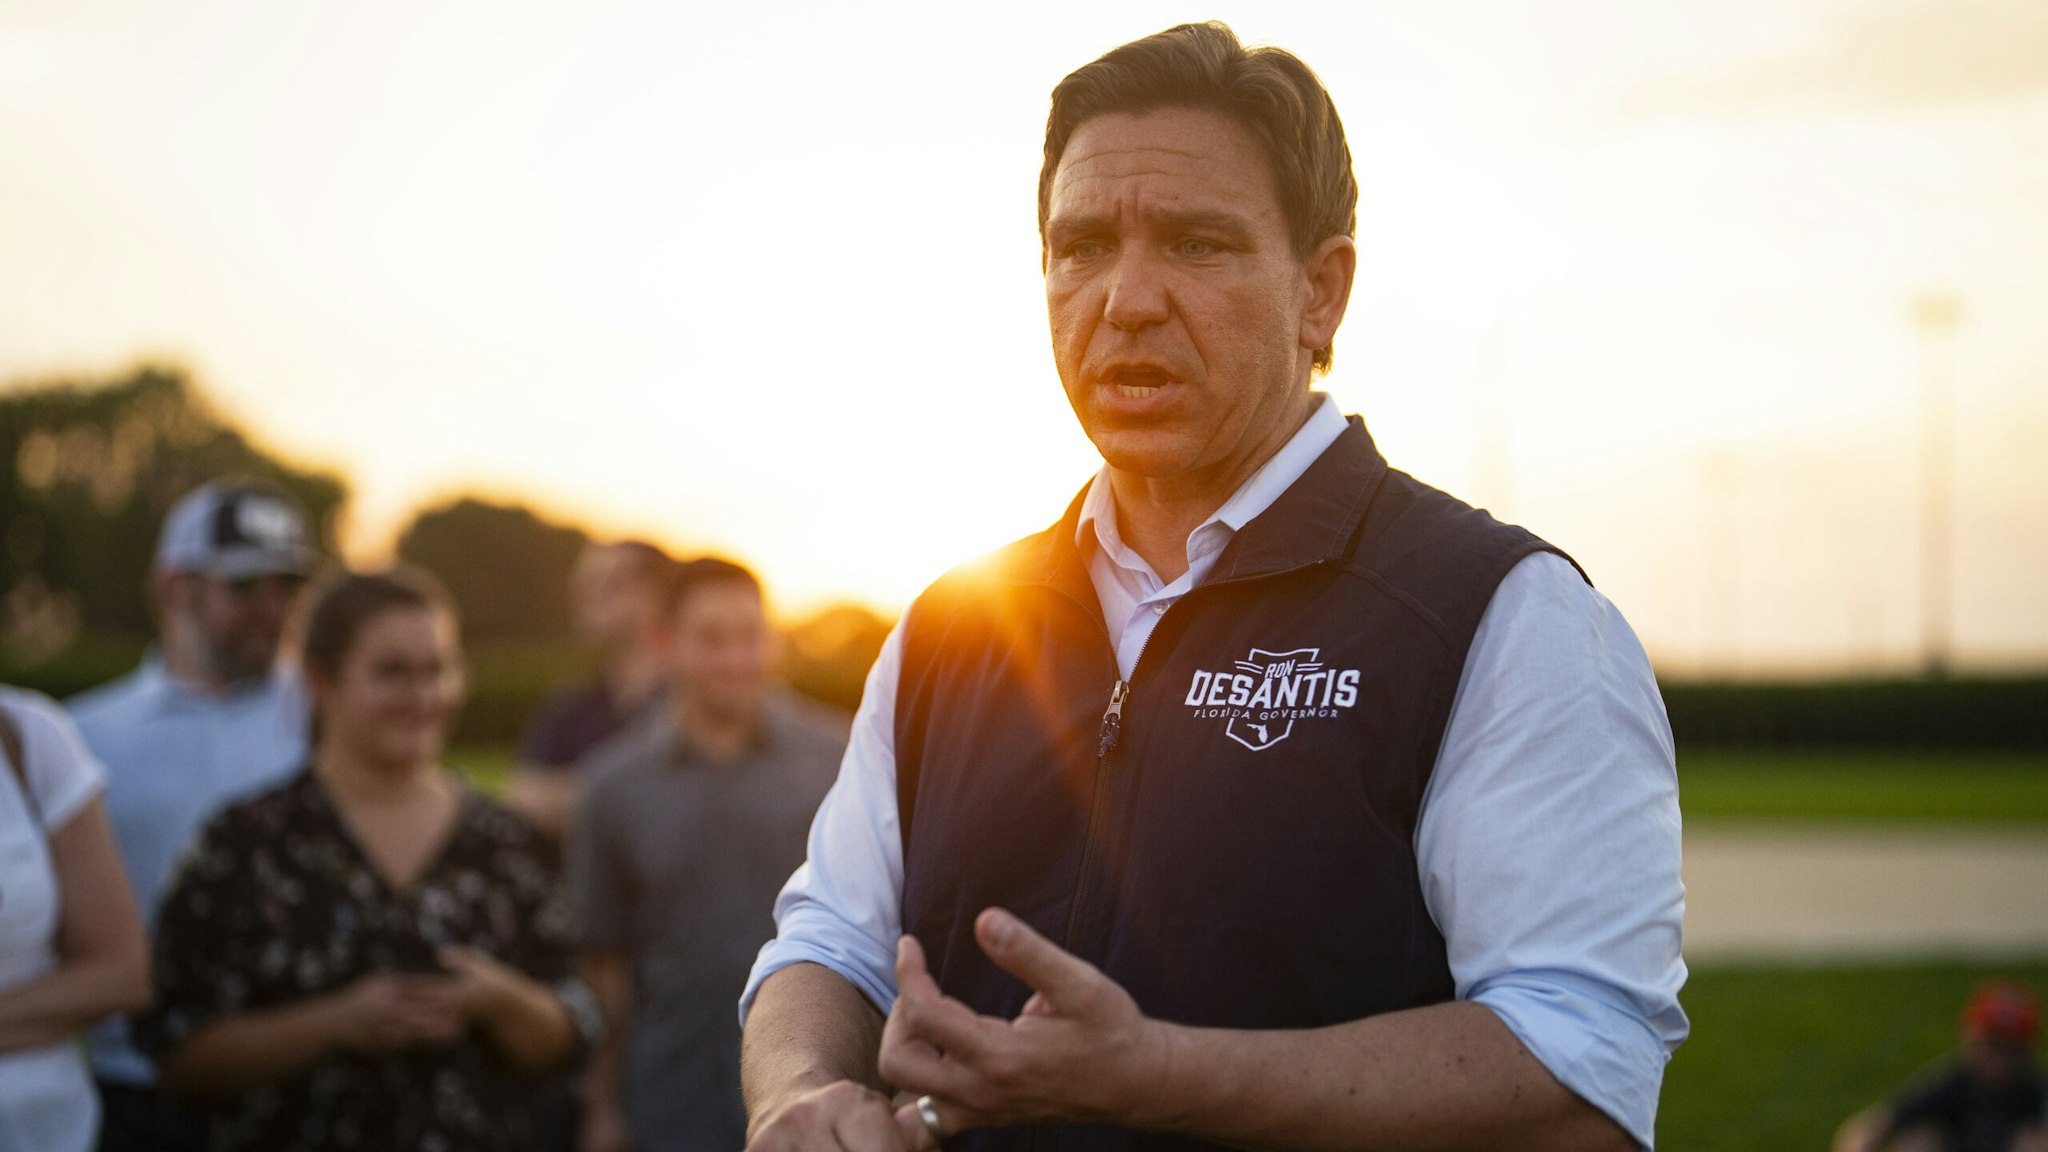 Ron DeSantis, governor of Florida and 2024 Republican presidential candidate, speaks with members of the media during a campaign stop at the Field of Dreams in Dyersville, Iowa, US, on Thursday, Aug. 24, 2023. Republican candidates this week battled each other over the economy in their first debate of the 2024 race, waging attacks on President Joe Biden's policies while seeking to gain ground on the absent GOP frontrunner Donald Trump.